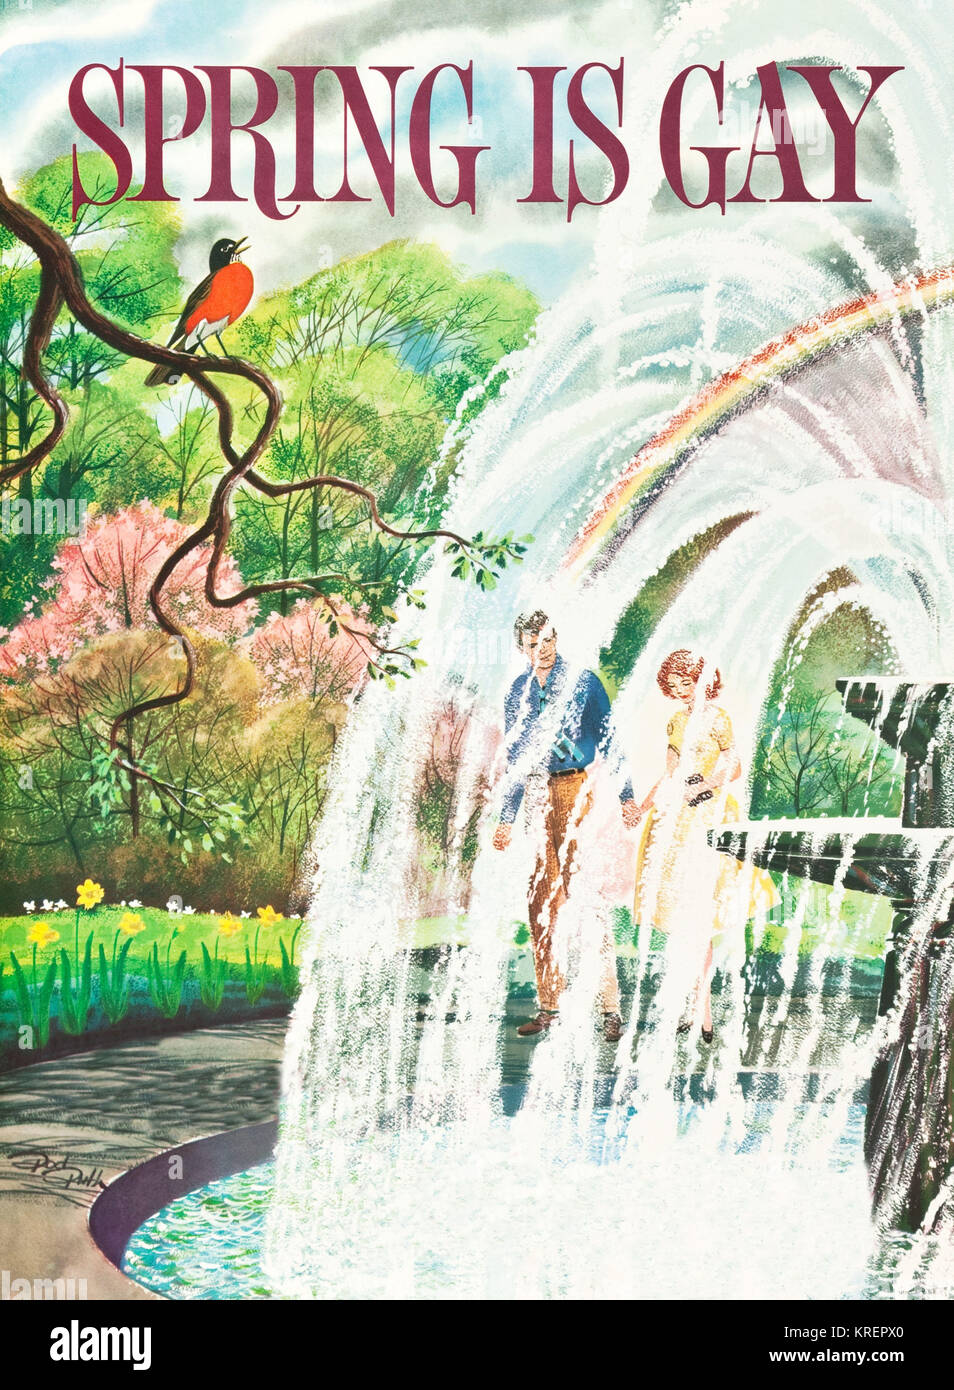 'Artist Rod Ruth (1912-1987) to design a series of posters promoting bus travel throughout the four seasons. ''Fall is Vivid,'' ''Winter Bewitches,'' ''Summer is Fun,'' and ''Spring is Gay.'' Ruth's prodigious career included work as an illustrator for Chicago based magazines, corporate advertising campaigns, children's books, the comic strip ''The Toodles'' from 1941-1958, and perhaps his best known work, the 1972 book Album of Dinosaurs. This original 1960s poster by Ruth trumpets spring in all its pastel perfection -- pink tree blossoms, yellow daffodils, a robin's egg blue sky -- and an ac Stock Photo